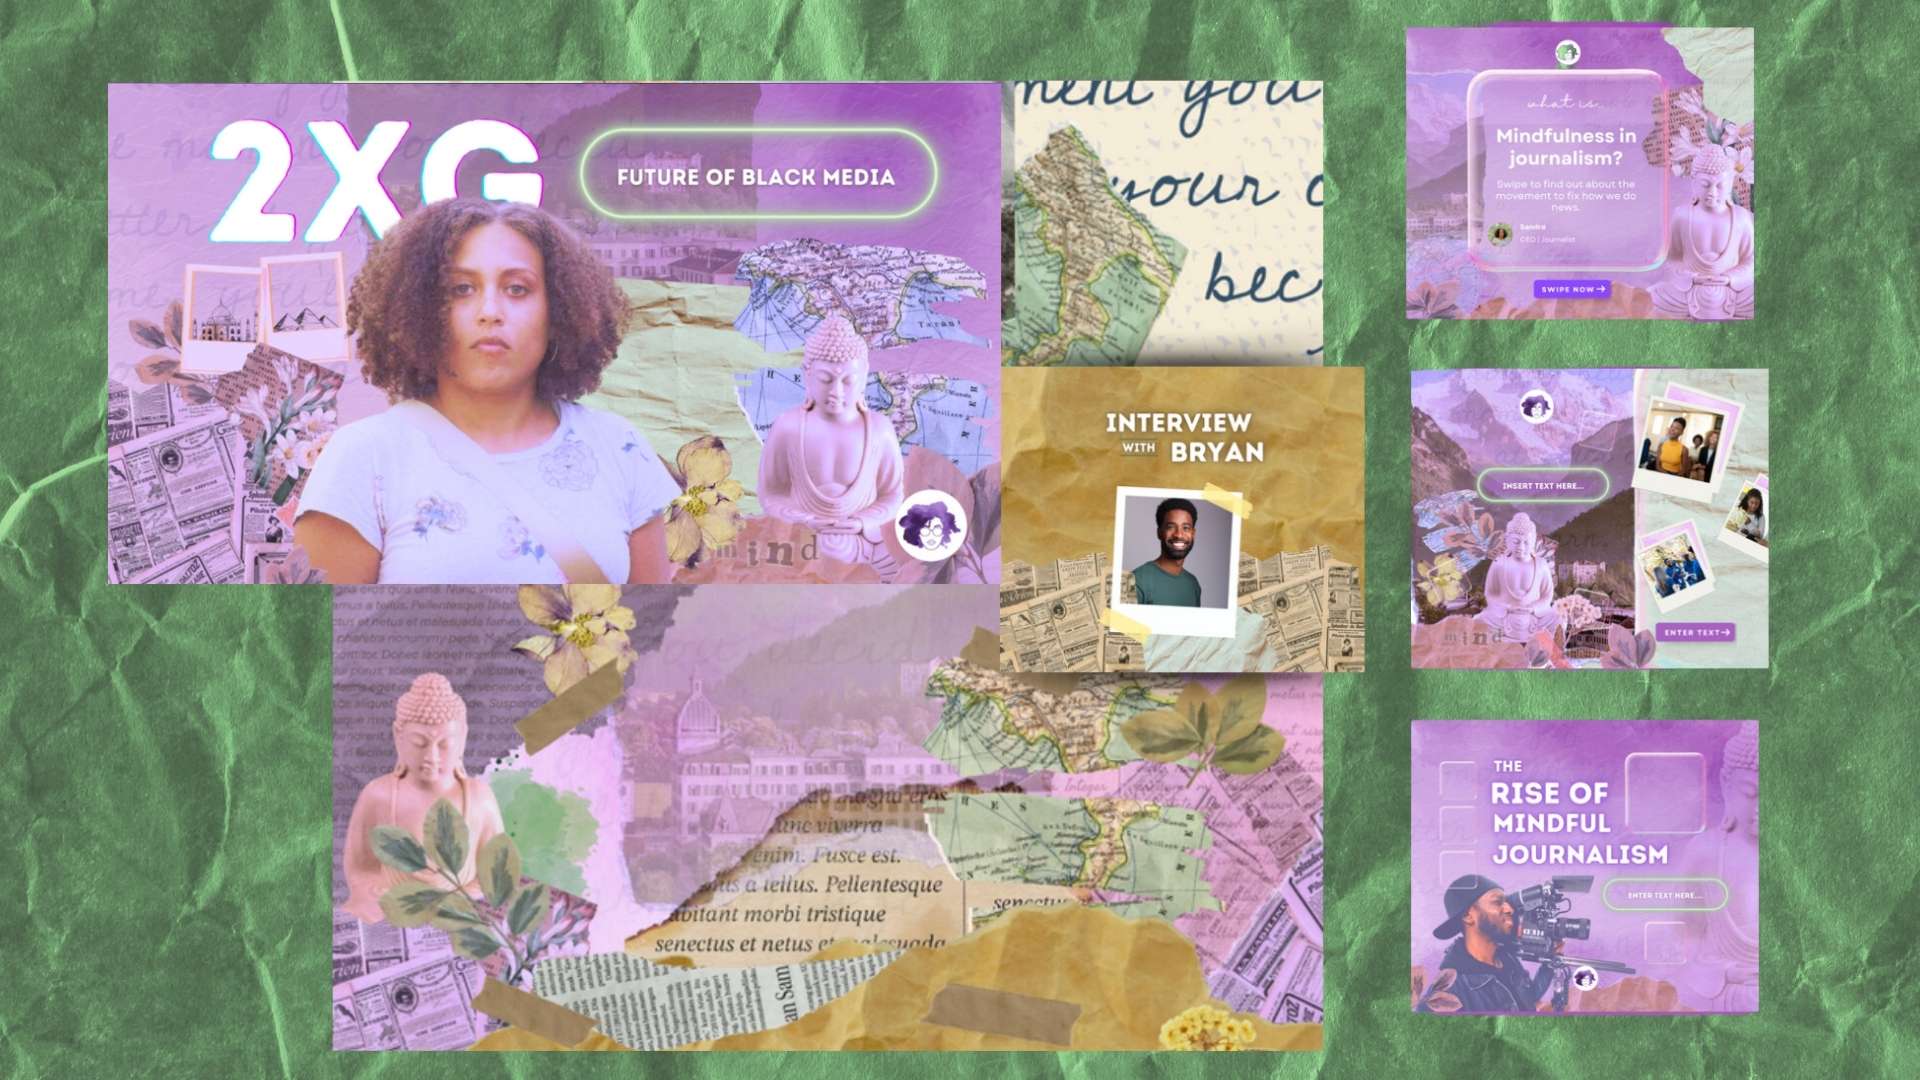 Several examples of the new look with scrapbook elements.